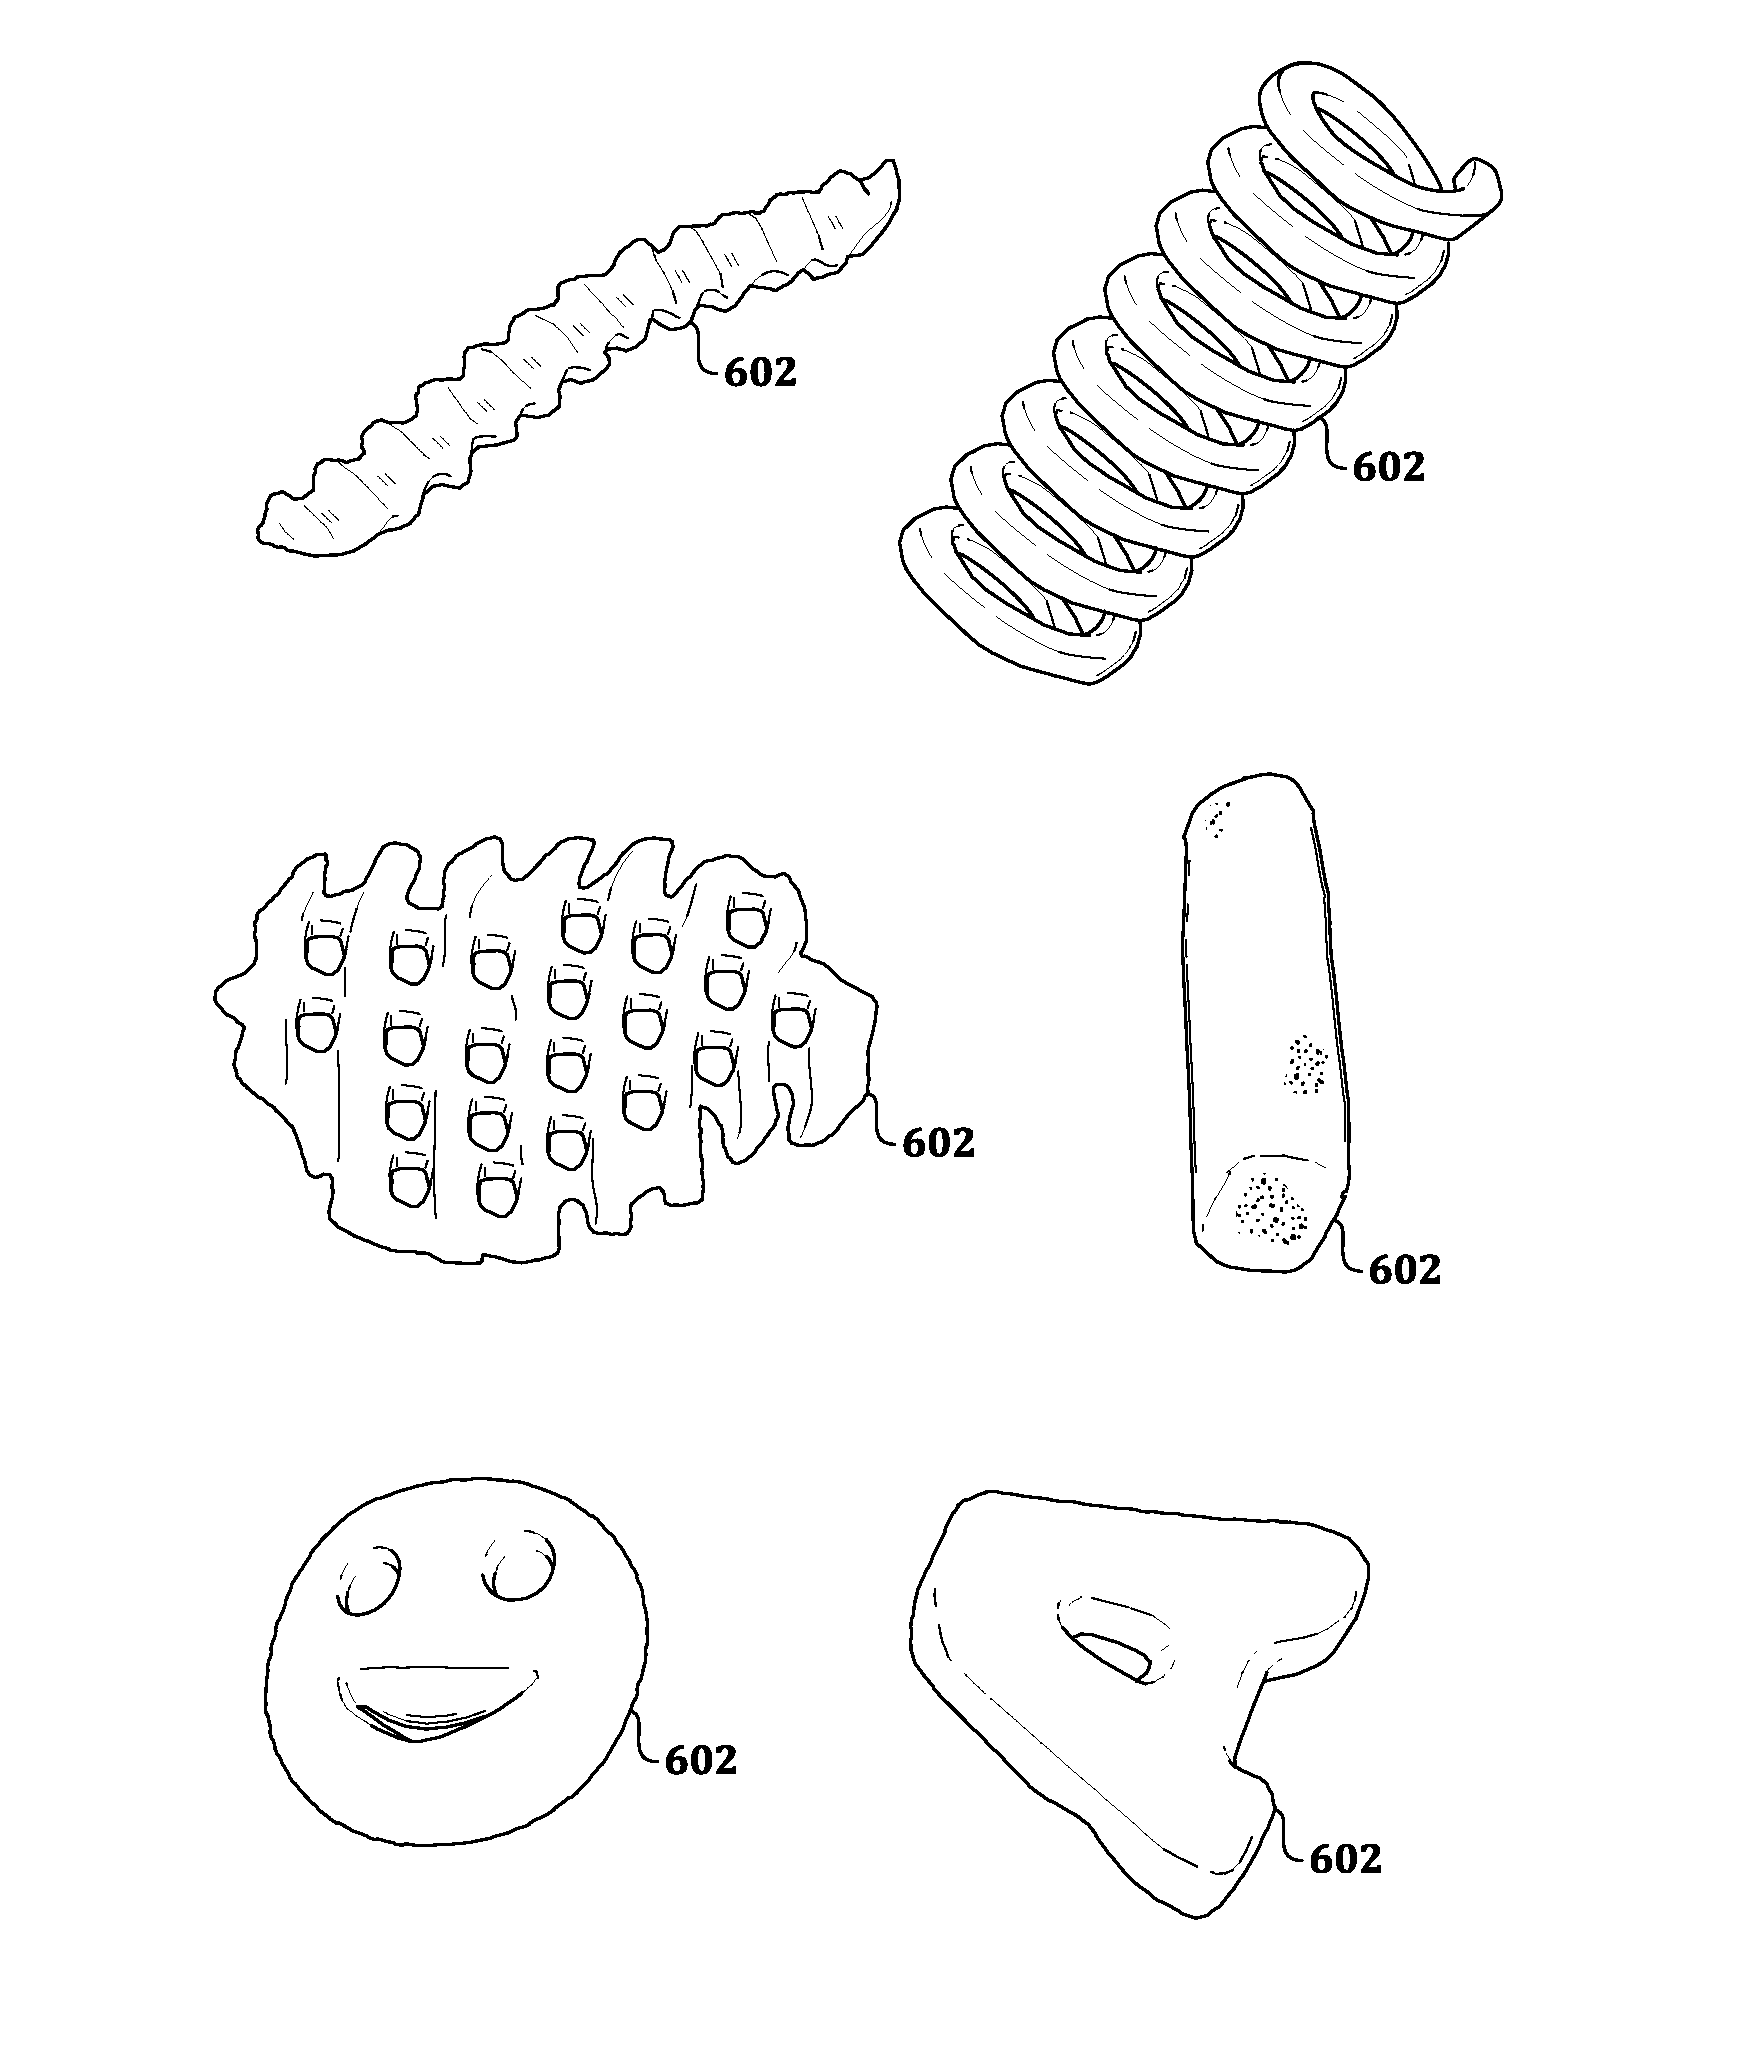 Methods and Compositions for Preparation of Formed Food Products Using Fresh or Prepared Vegetables and/or Legumes and Other Ingredients